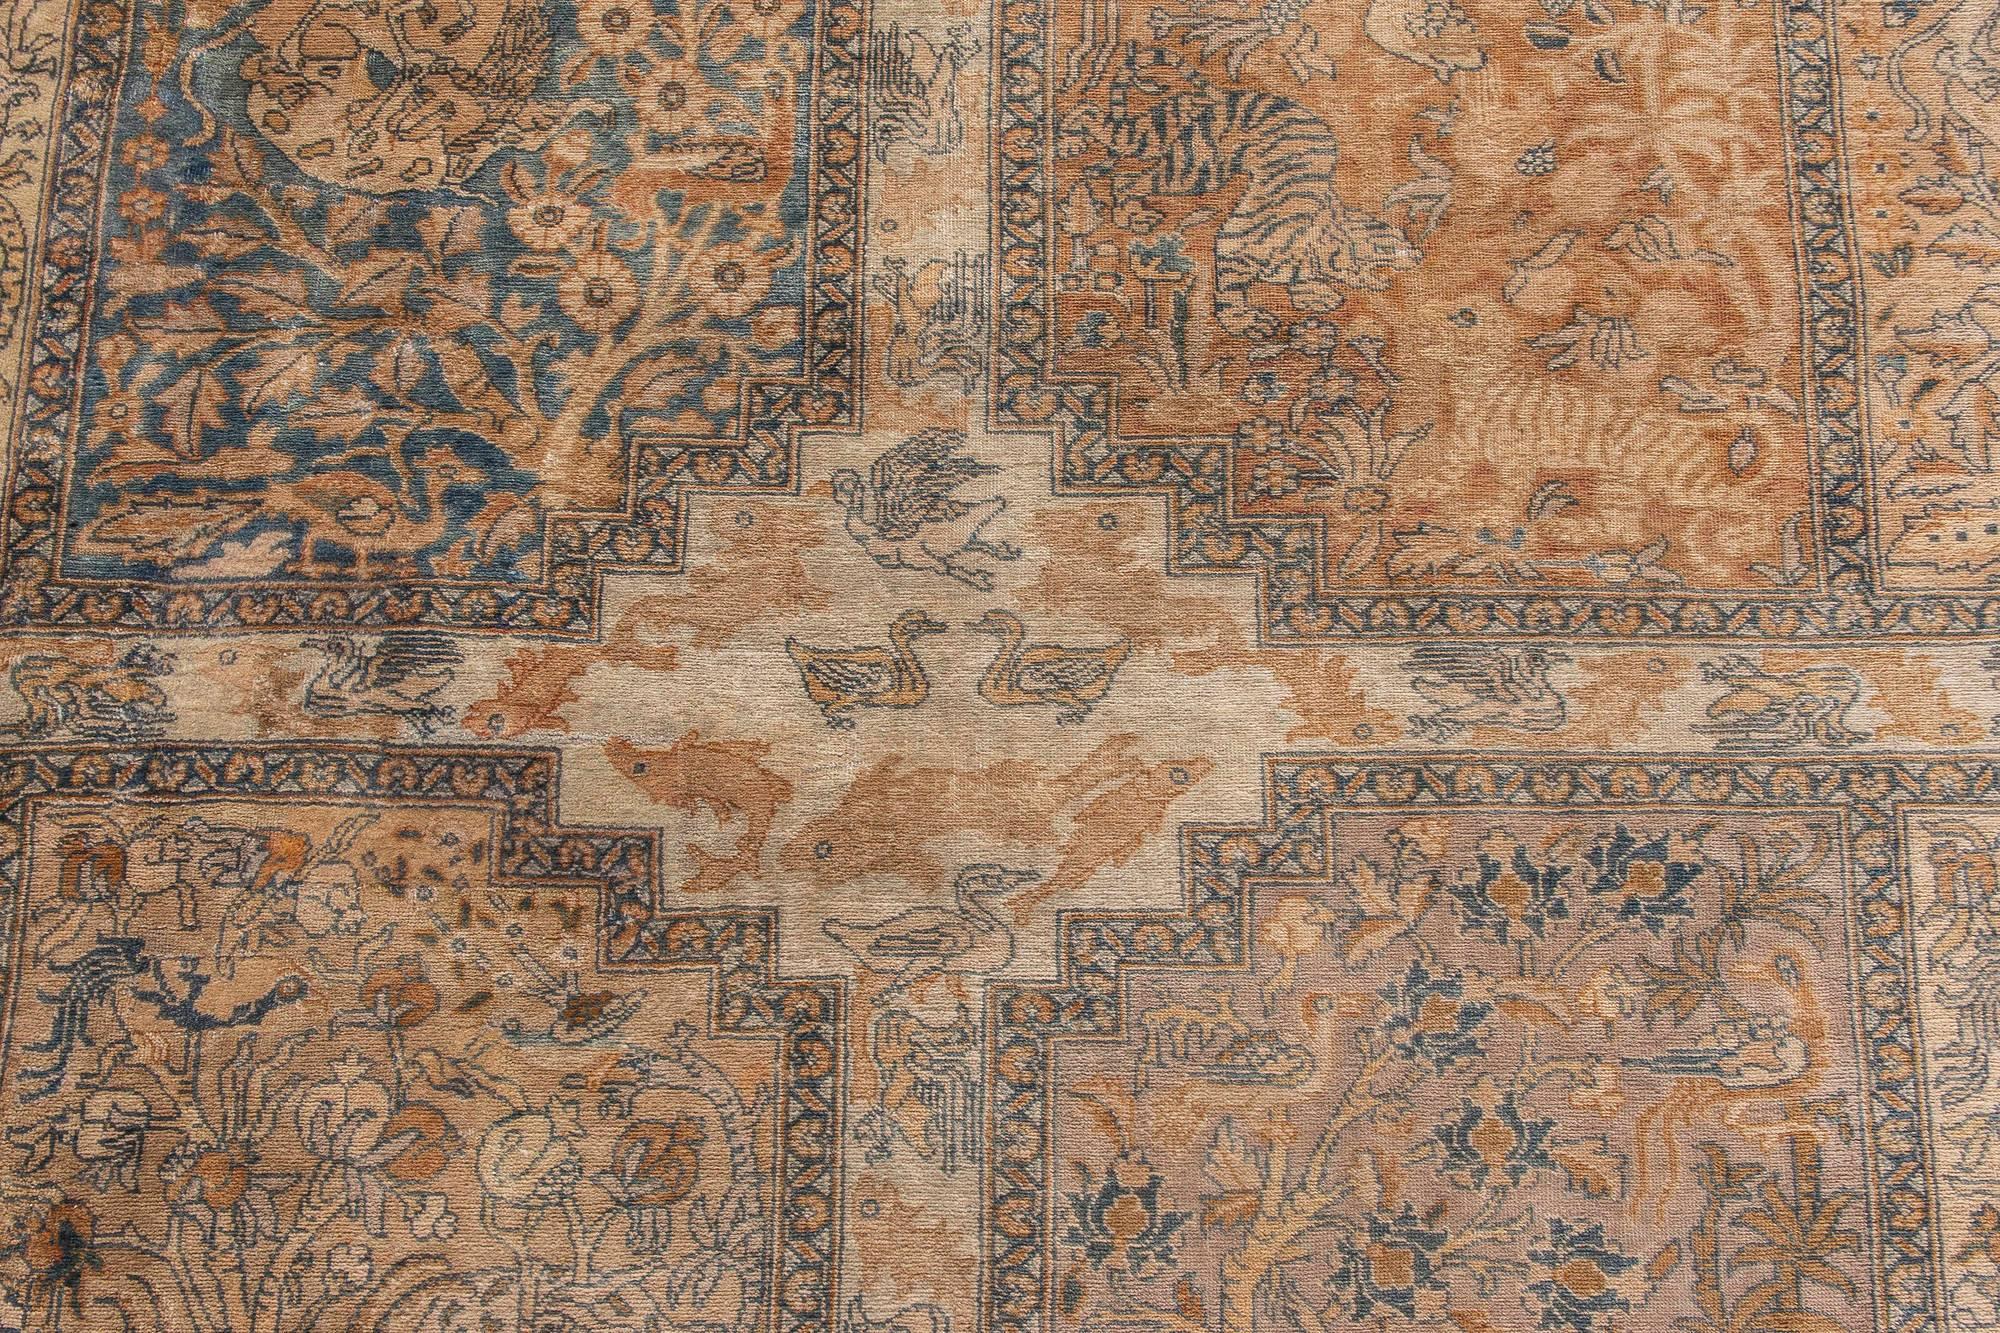 An early 20th century Persian Tabriz antique garden carpet, with an overall design of rectangular panels containing flora and fauna in shades of beige, ochre and green within a lush border of exotic trees.